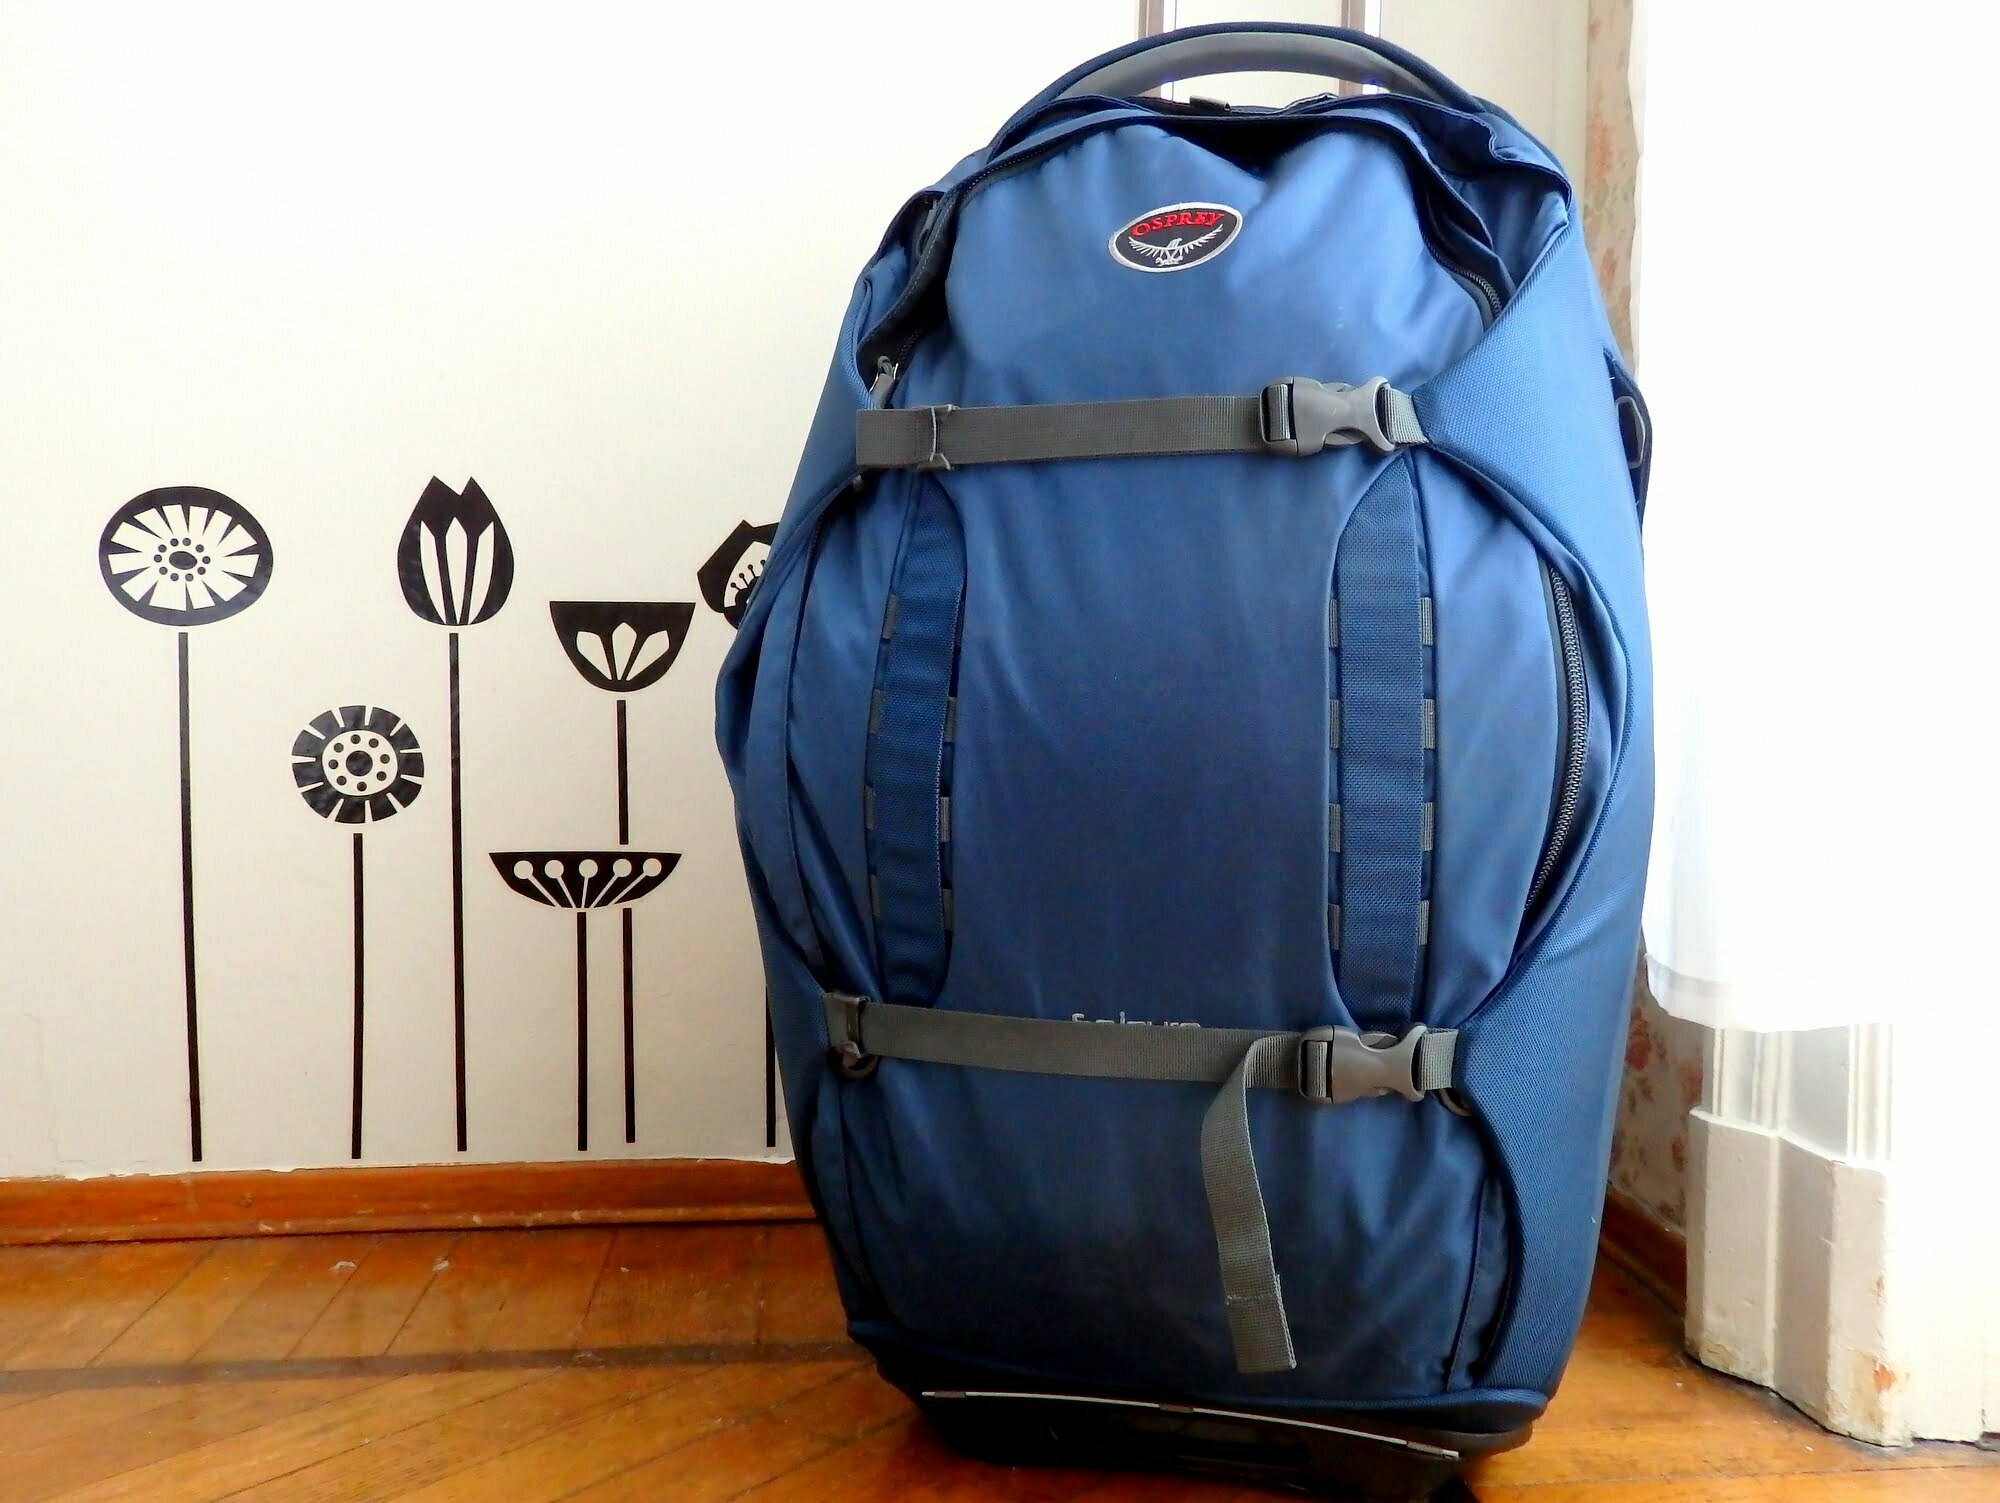 Expertise koffie Riet Why the Osprey Sojourn is by far the Best Backpack for Travel!